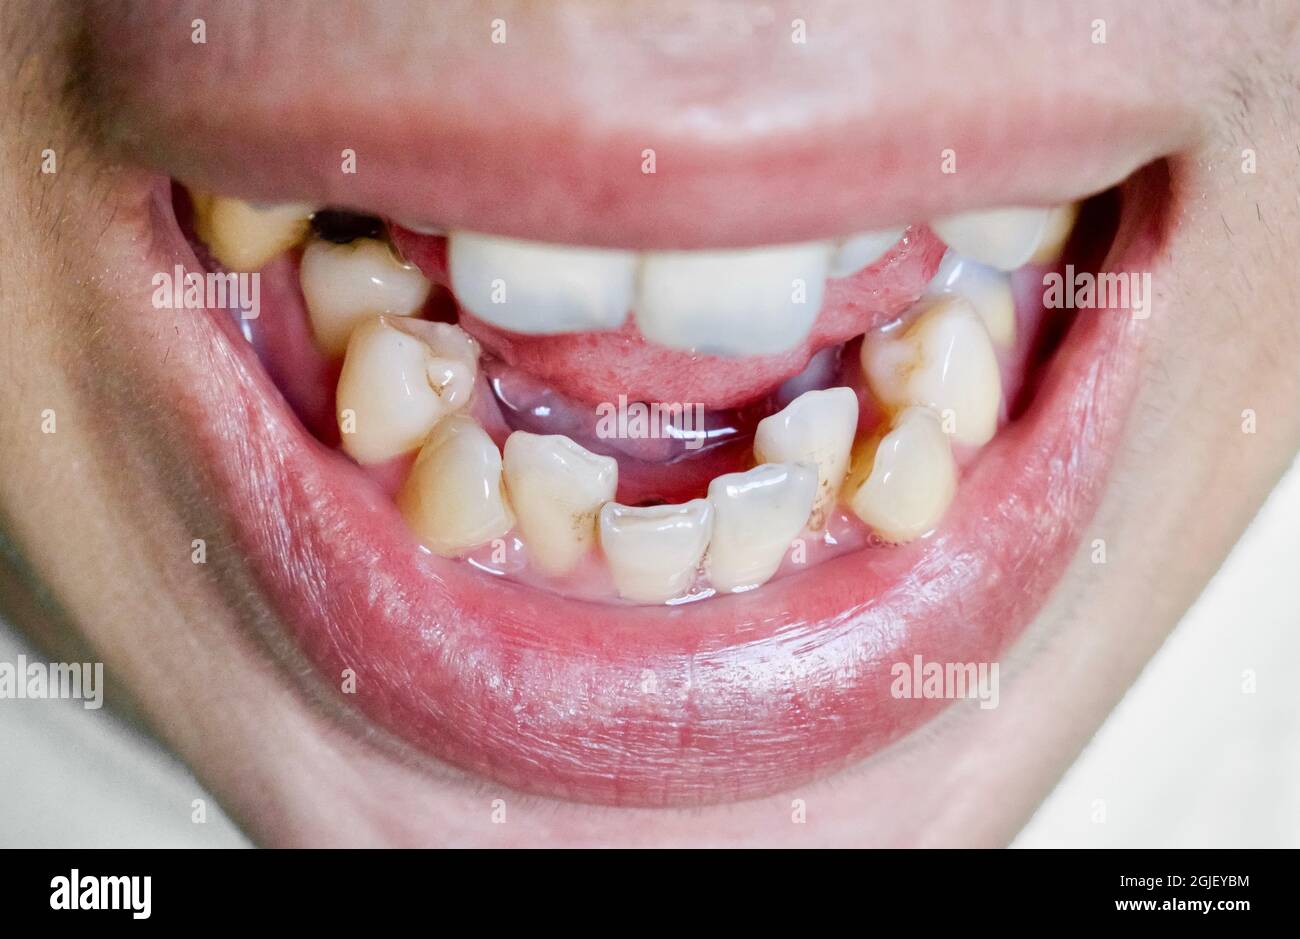 Stacked or overlapping teeth of Asian man. Also called crowded teeth. Closeup view. Stock Photo